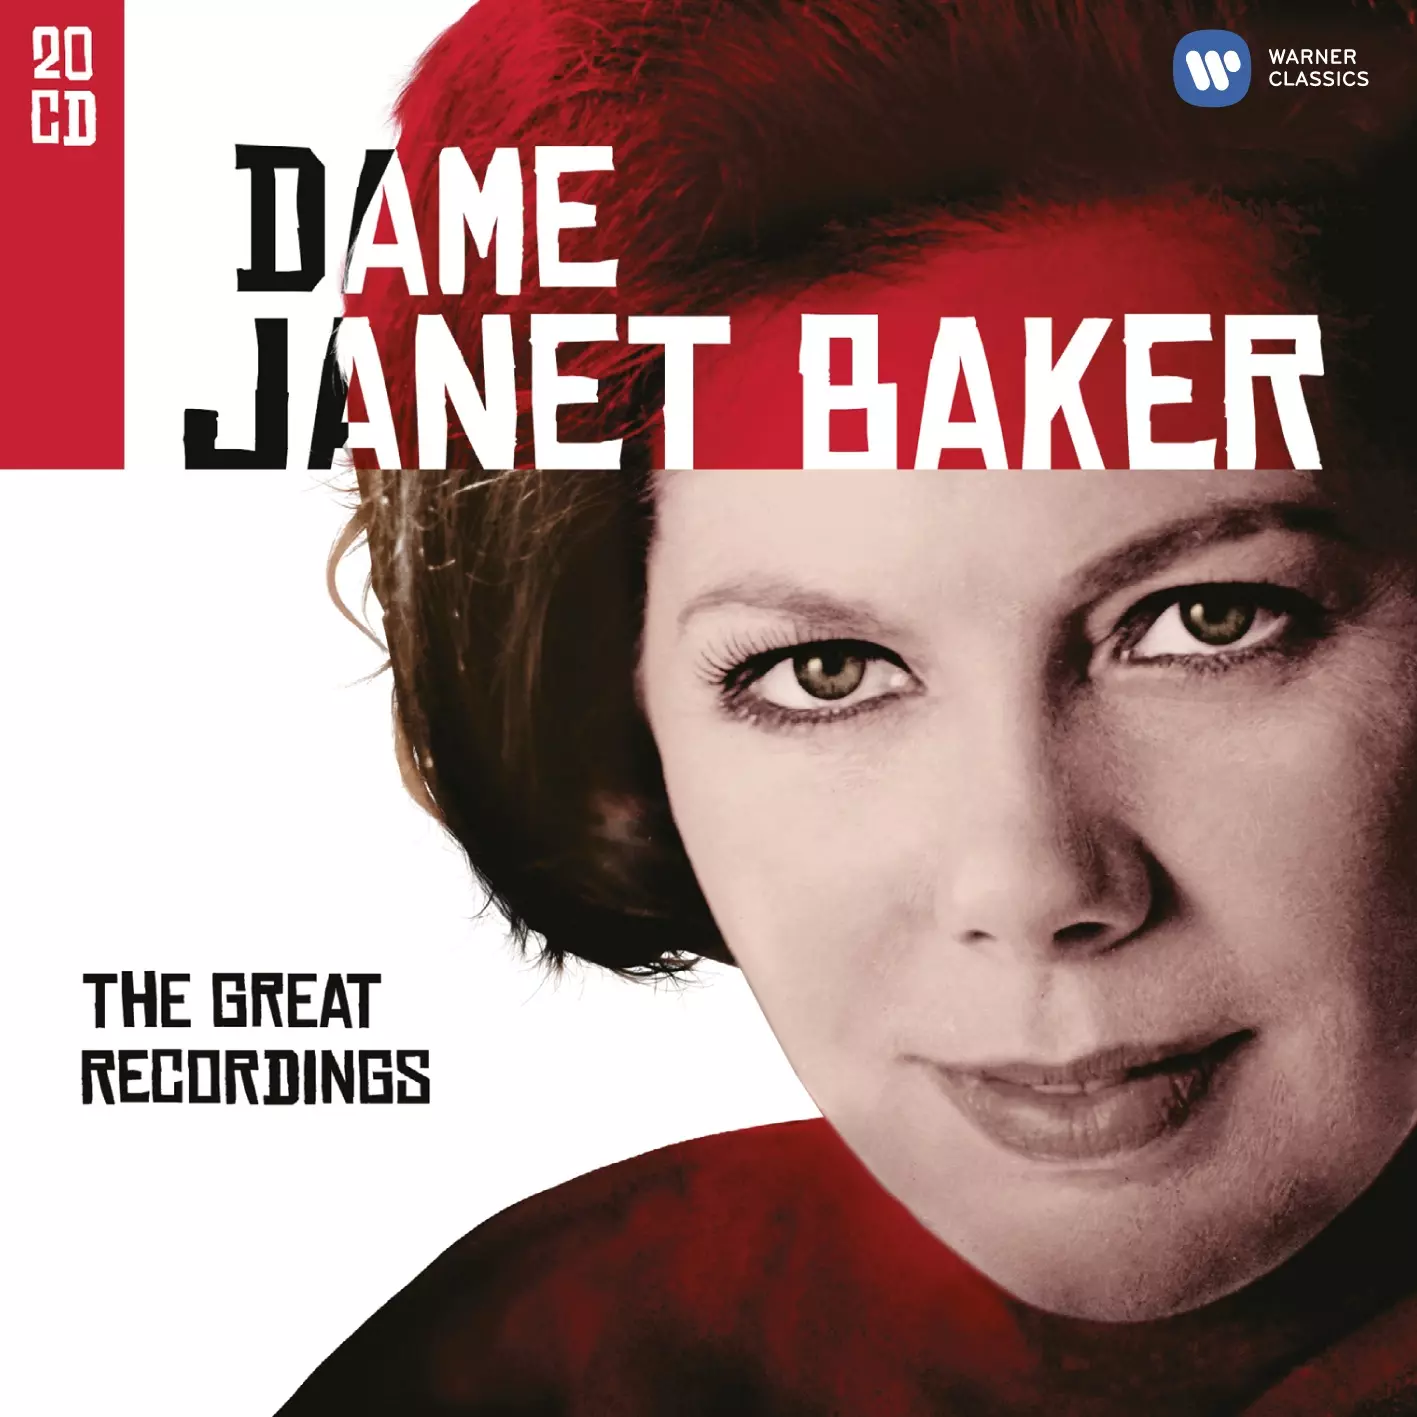 Janet Baker - The Great Recordings